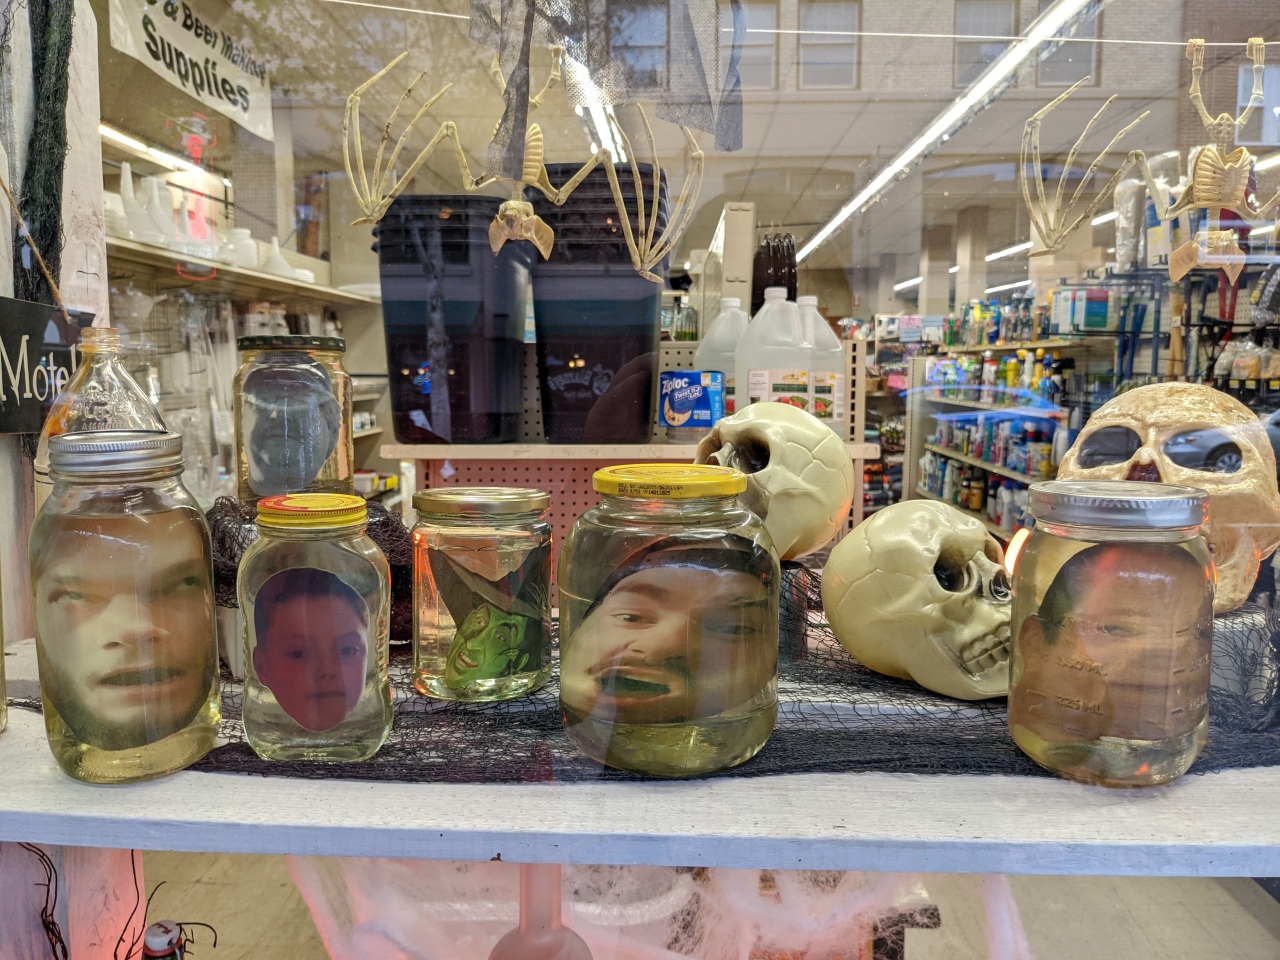 Among this hardware shop's bizarre decorations were some attempts to show employees' shrunken heads in jars.